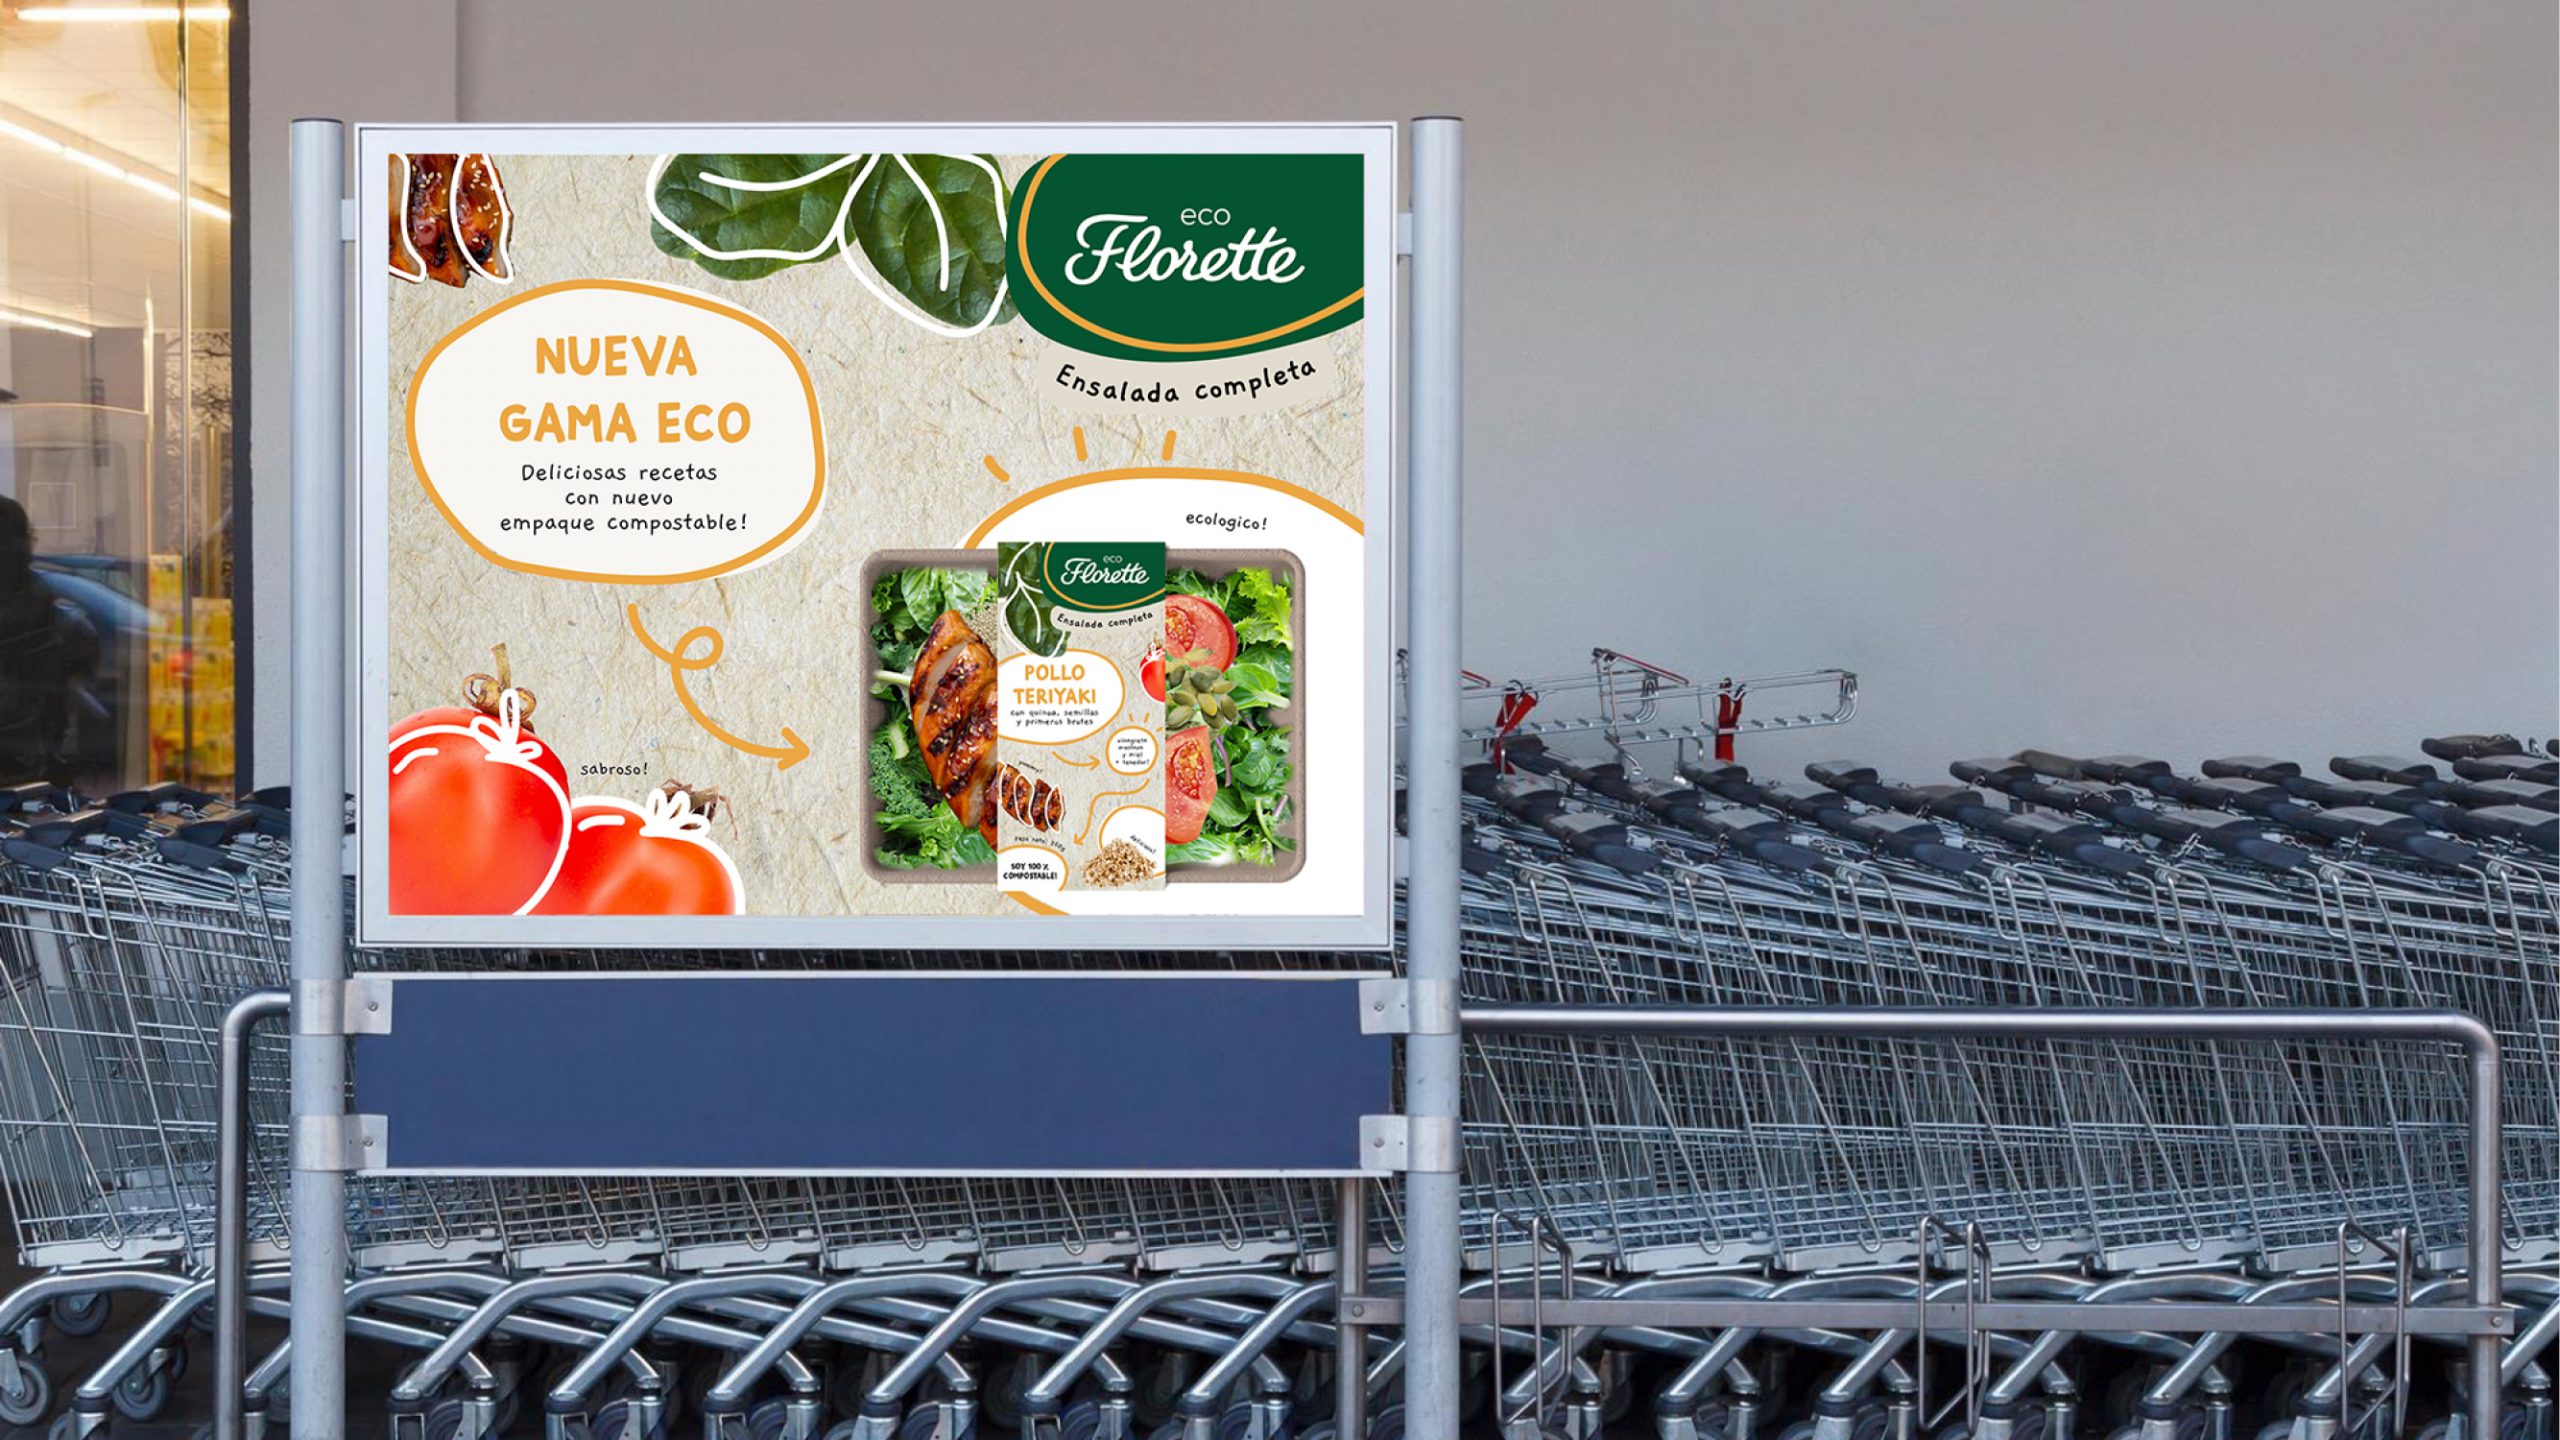 Poster for Florette Eco new campaign, outside a supermarket with a picture of a the new packaging design for chicken teriyaki salad